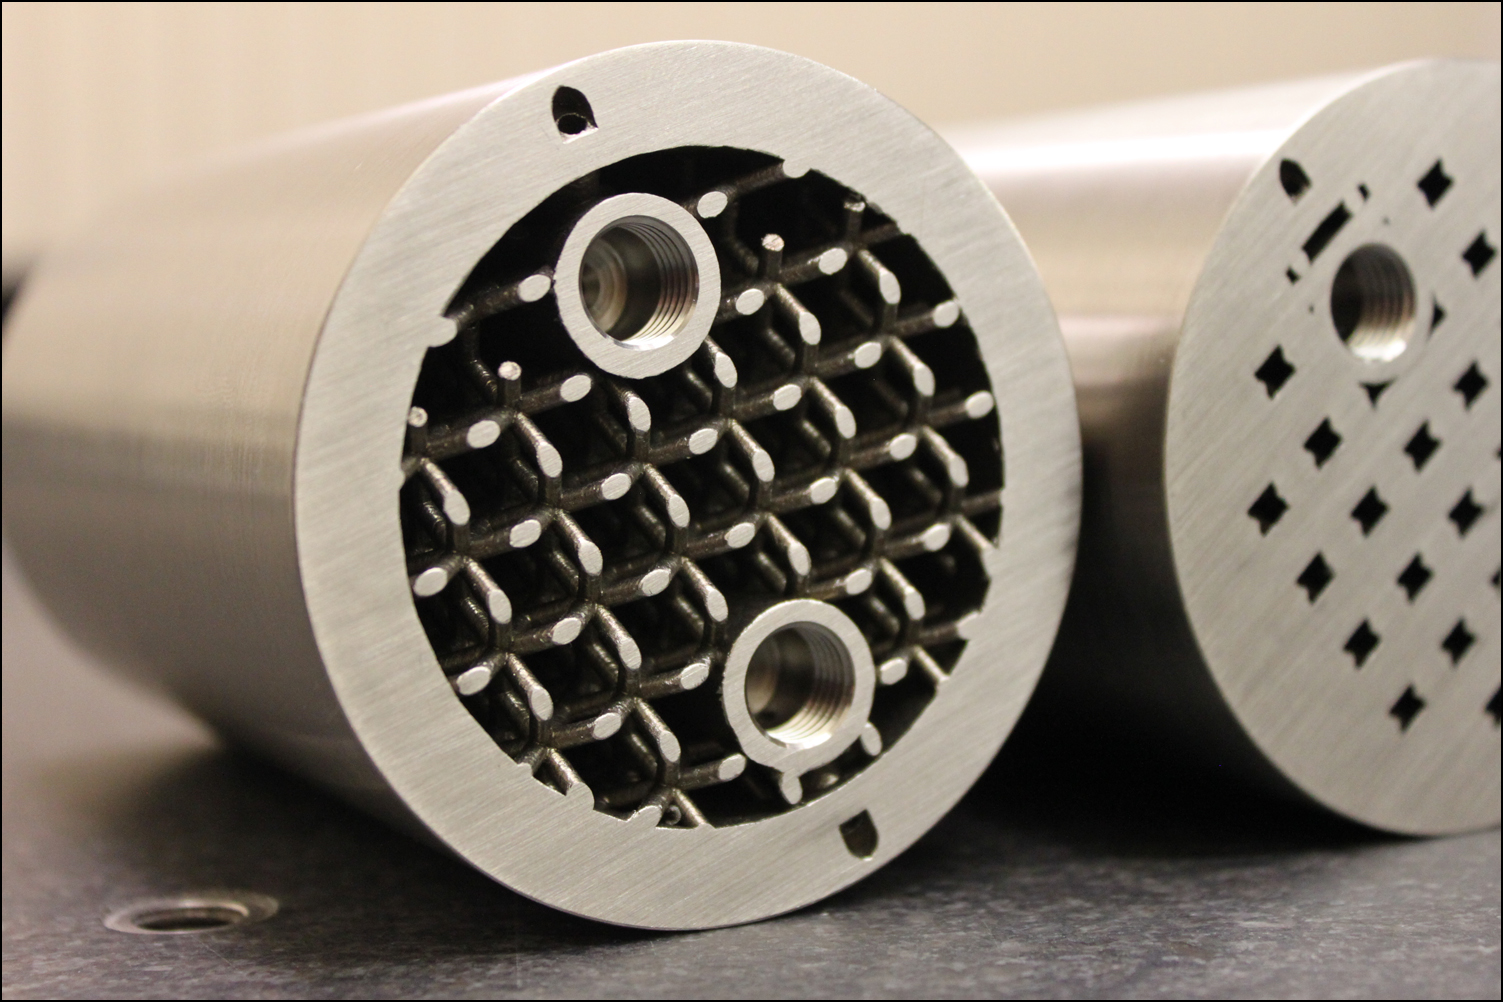 A “Hybrid Manufactured” Inconel component, additively manufactured then precision machined. This component was made in collaboration with Penn State’s CIMP-3D facility.